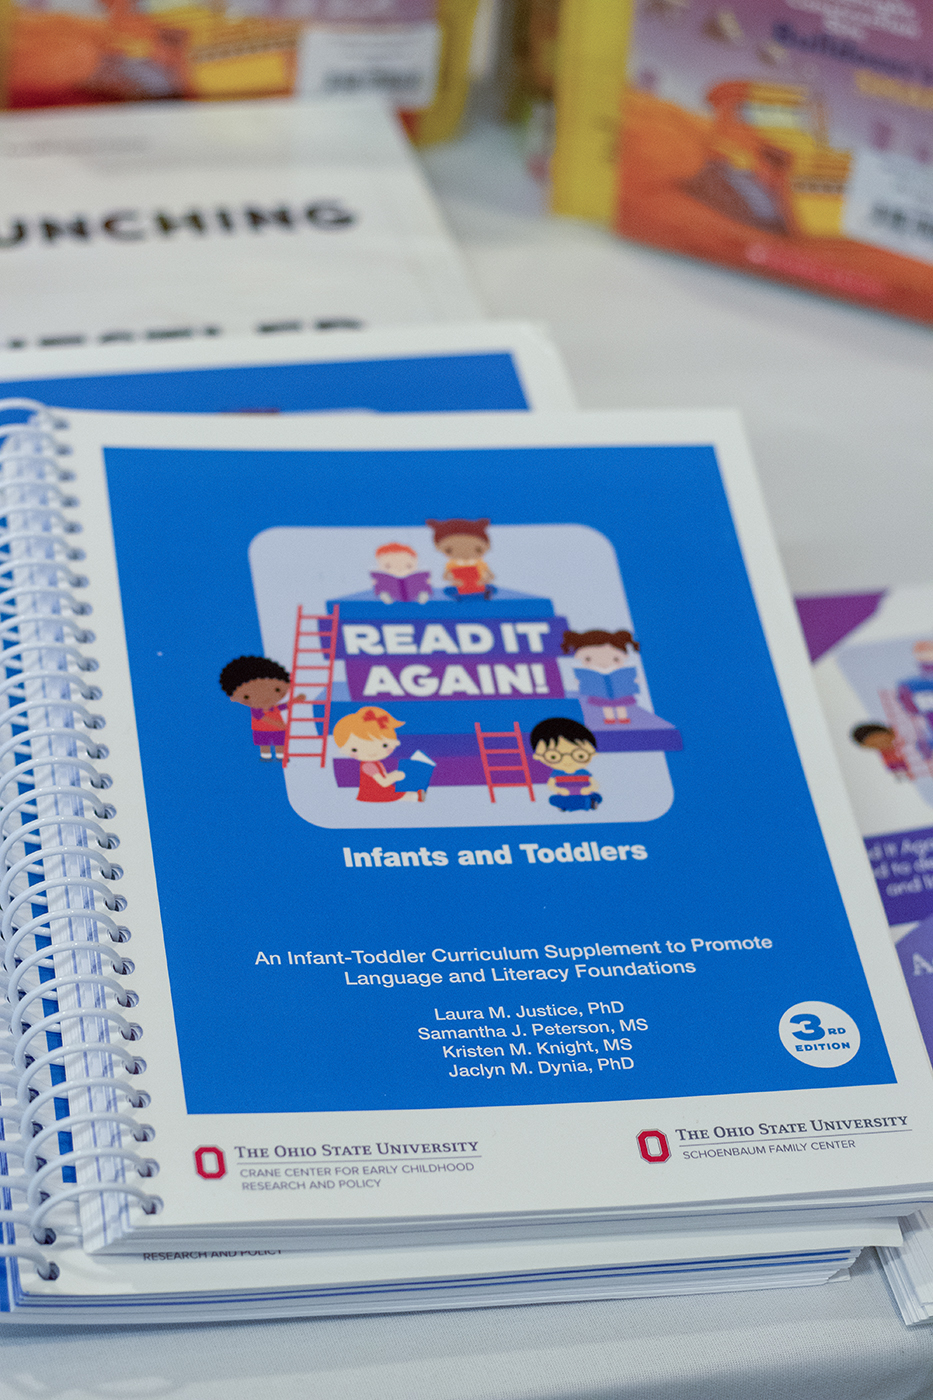 A stack of booklets titled "Read It Again! An Infant-Toddler Curriculum Supplement to Promote Language and Literacy Foundations" rest on a table. The booklets are spiral-bound and have a blue cover with a cartoon illustration showing a variety of small children reading books.